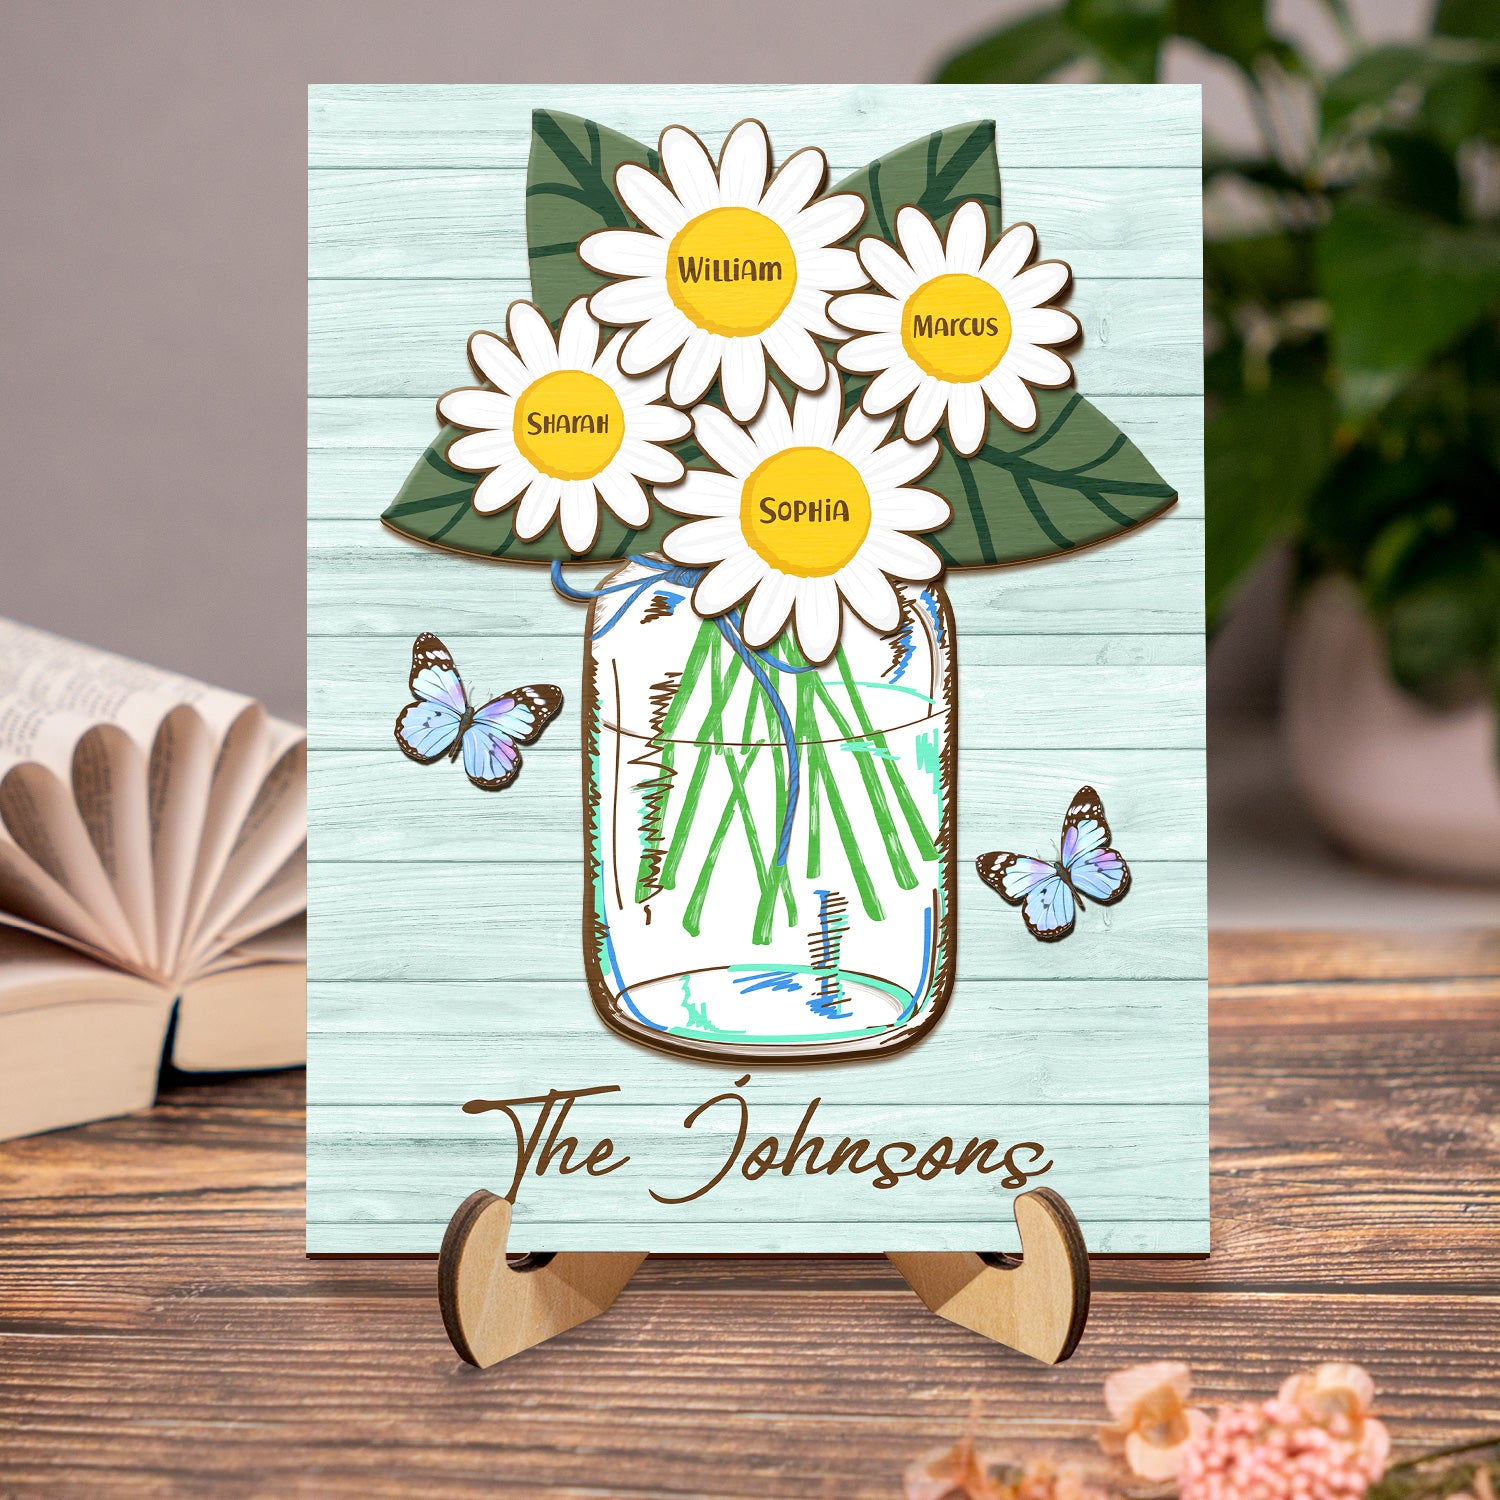 Daisies In Jar - Birthday, Loving Gift For Family, Couple, Parent, Grandparent - Personalized 2-Layered Wooden Plaque With Stand